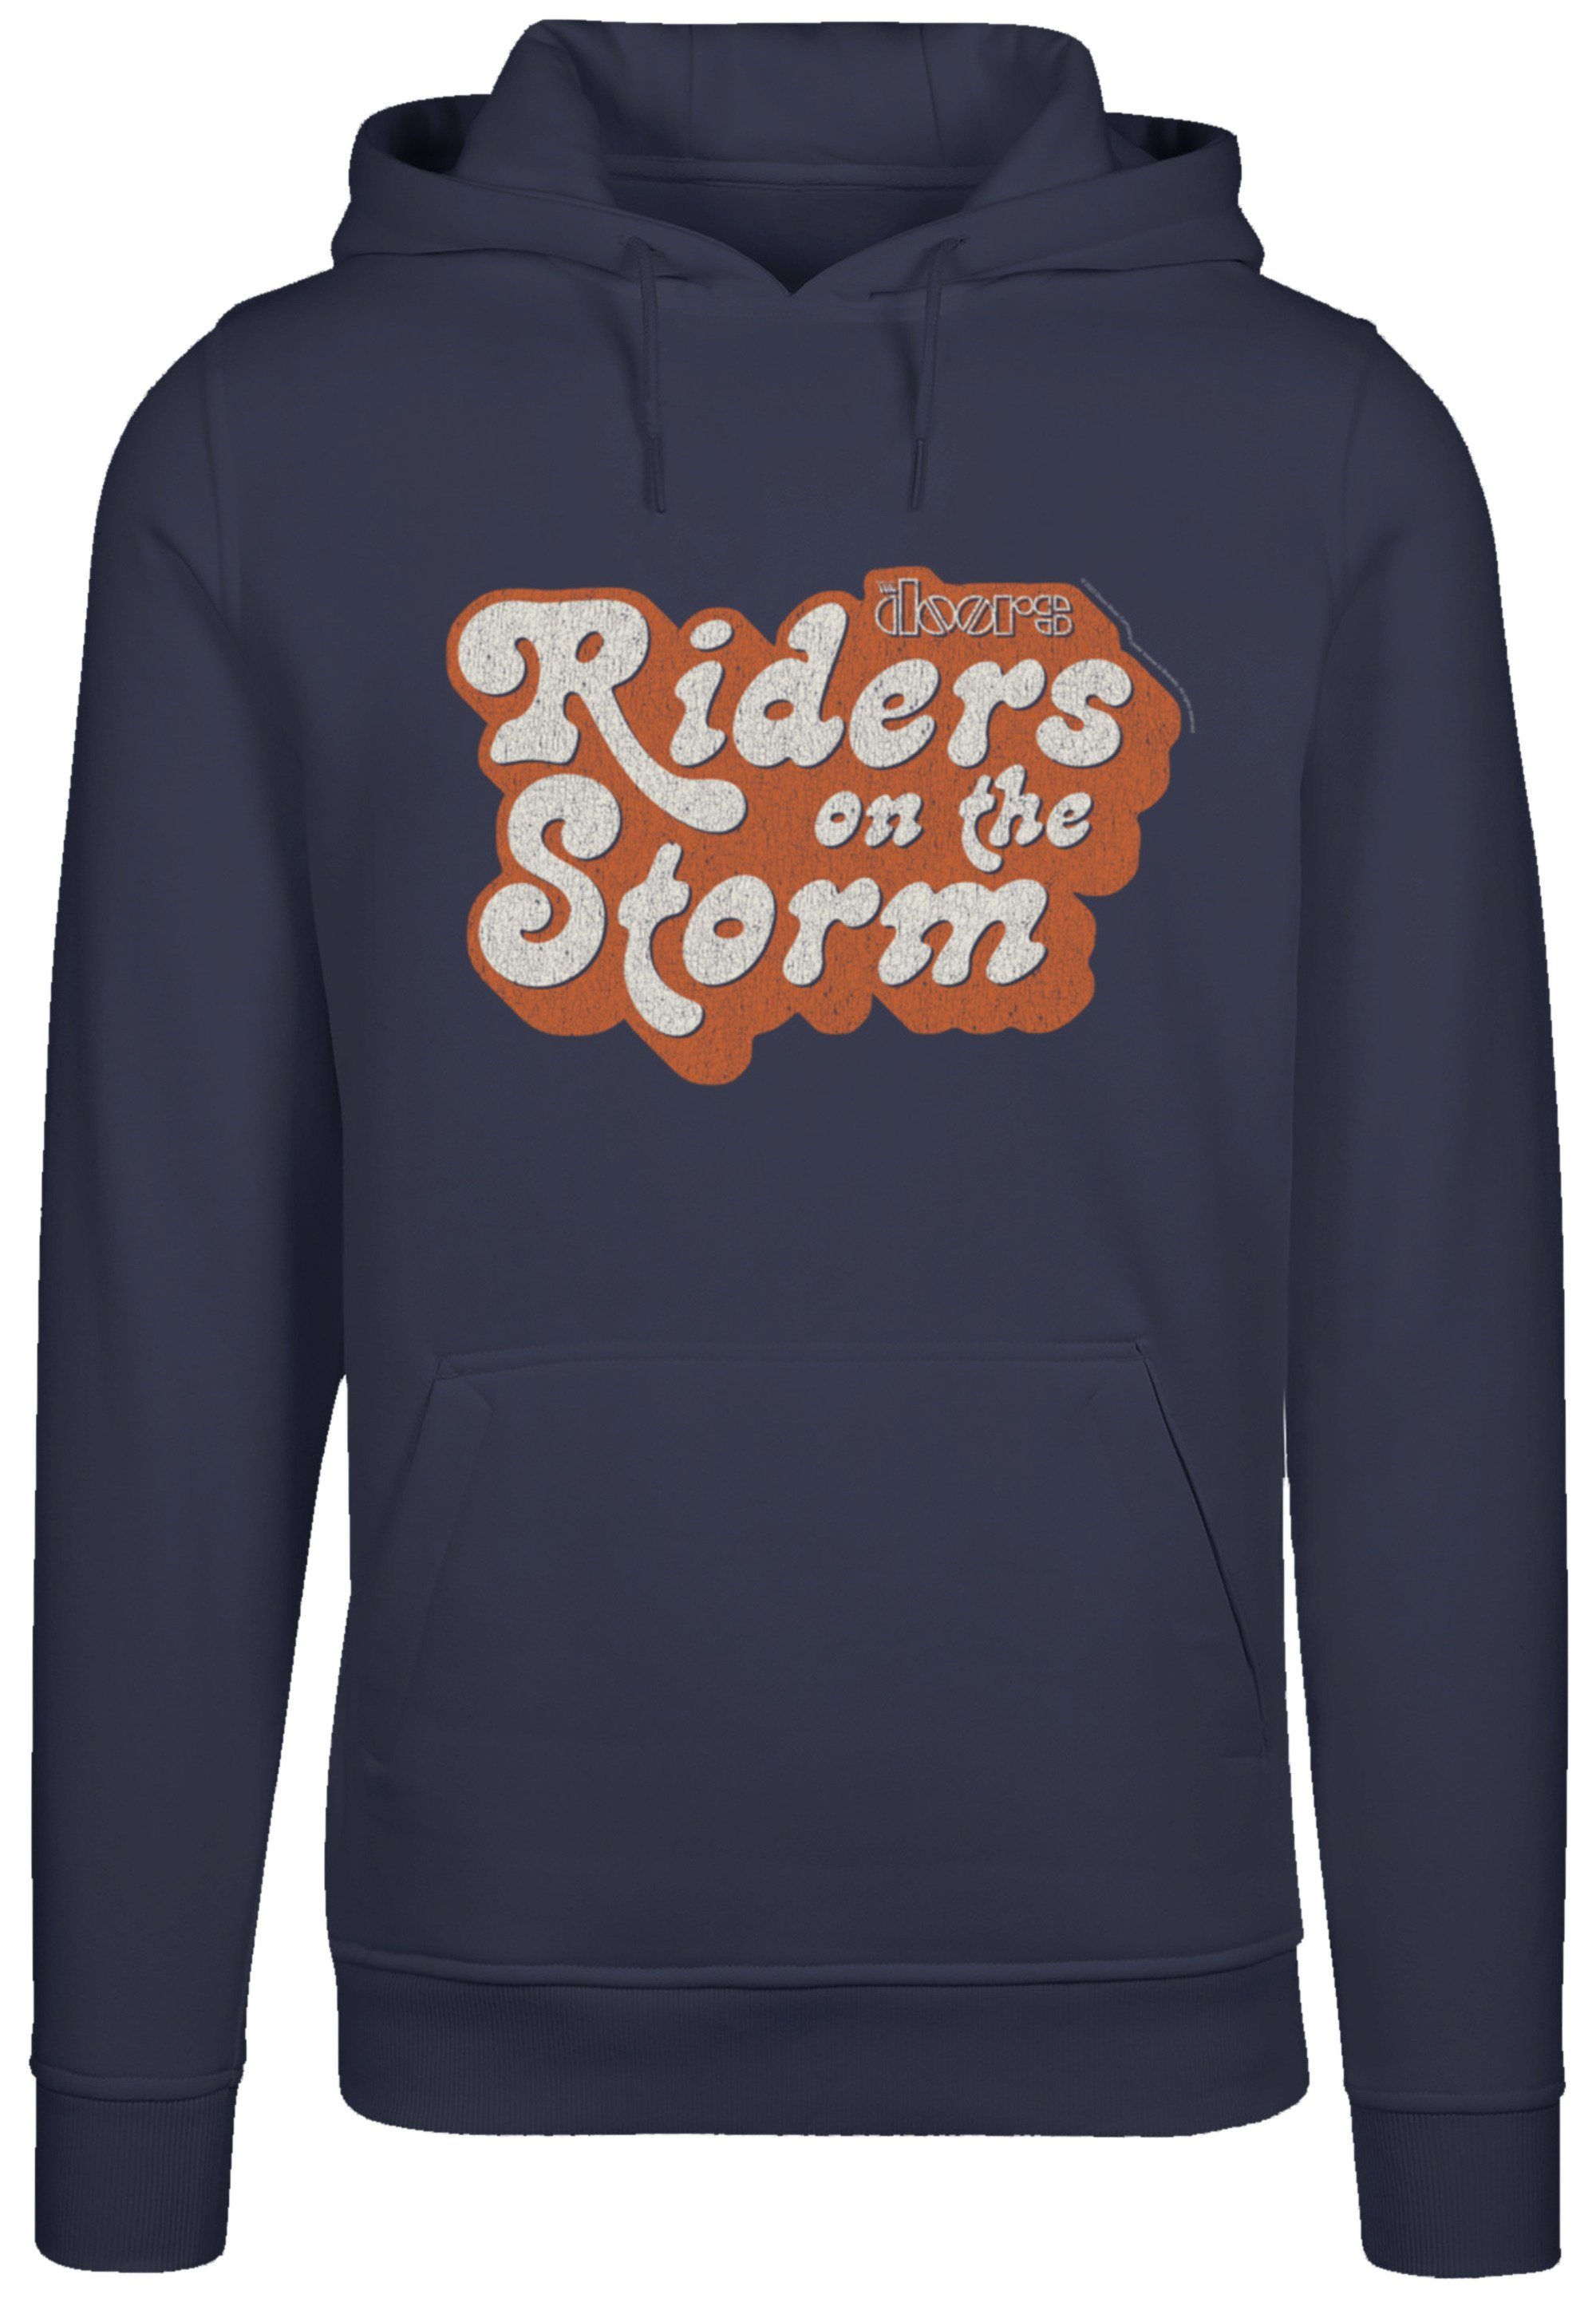 Music Premium the Band on Band, F4NT4STIC Qualität, Storm The Hoodie navy Riders Logo Logo Doors